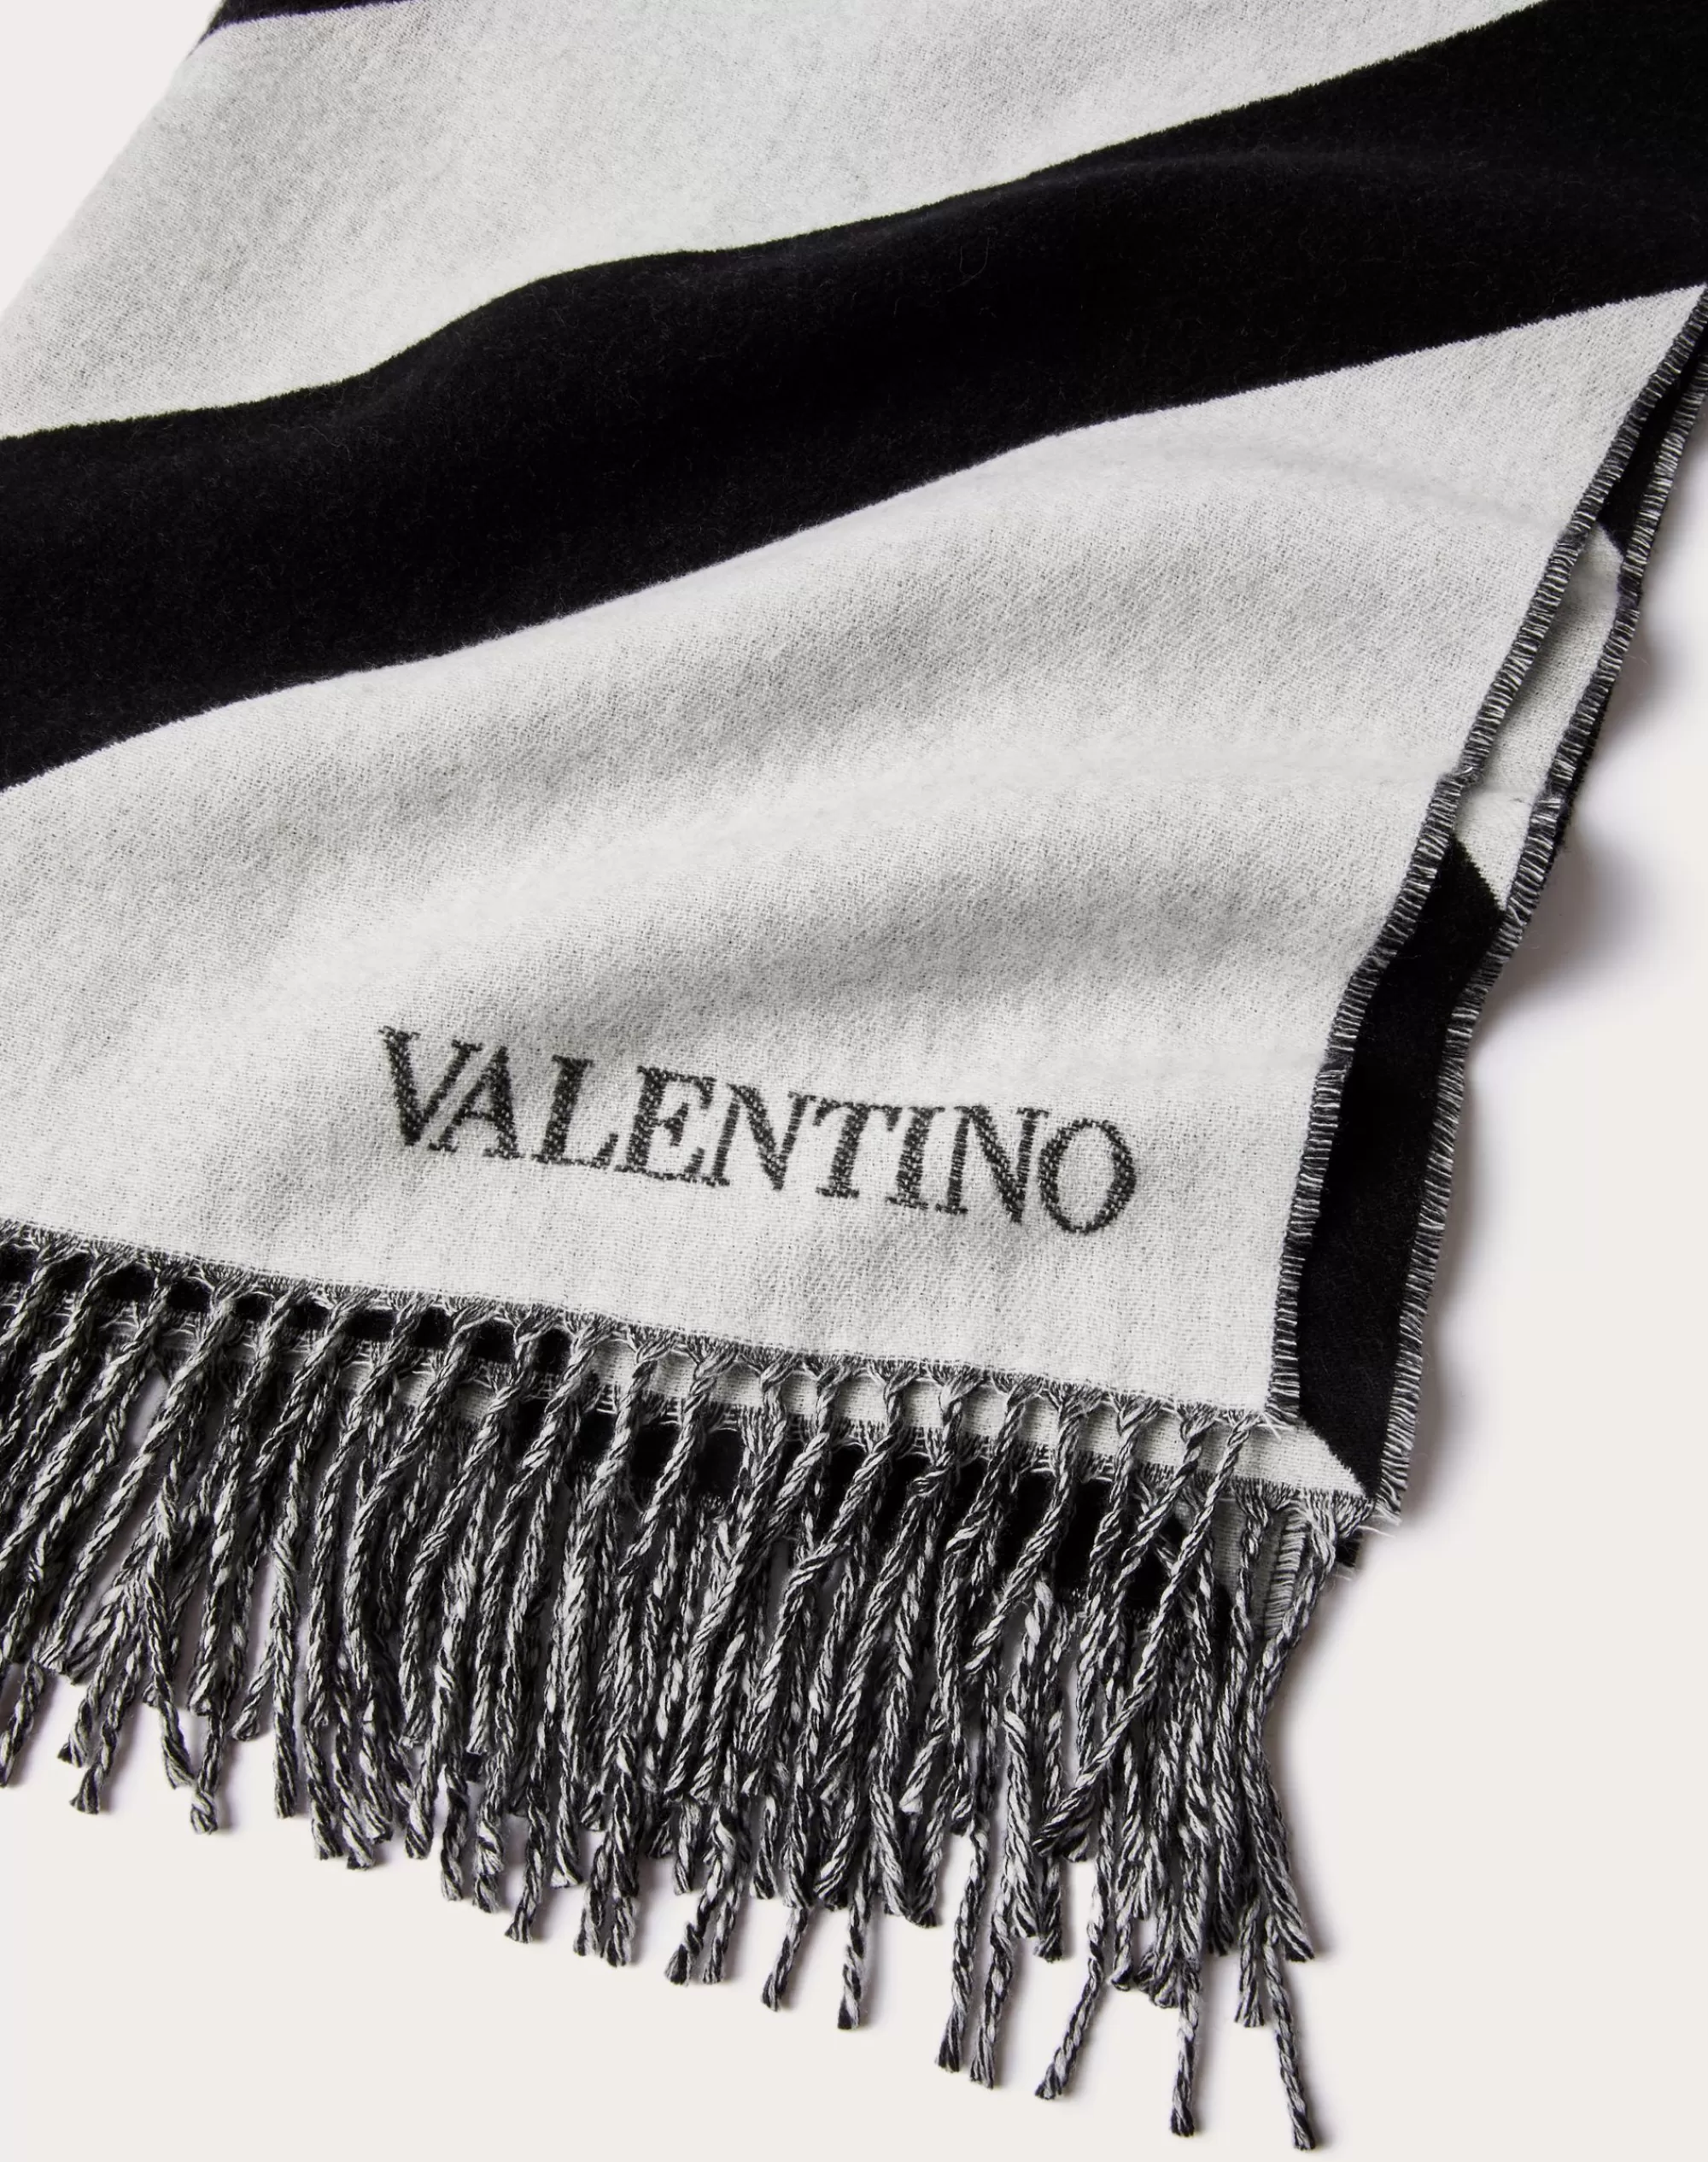 Valentino STRHYPE WOOL AND CASHMERE STOLE WITH STRHYPE JACQUARD WORK Ivory/black Fashion